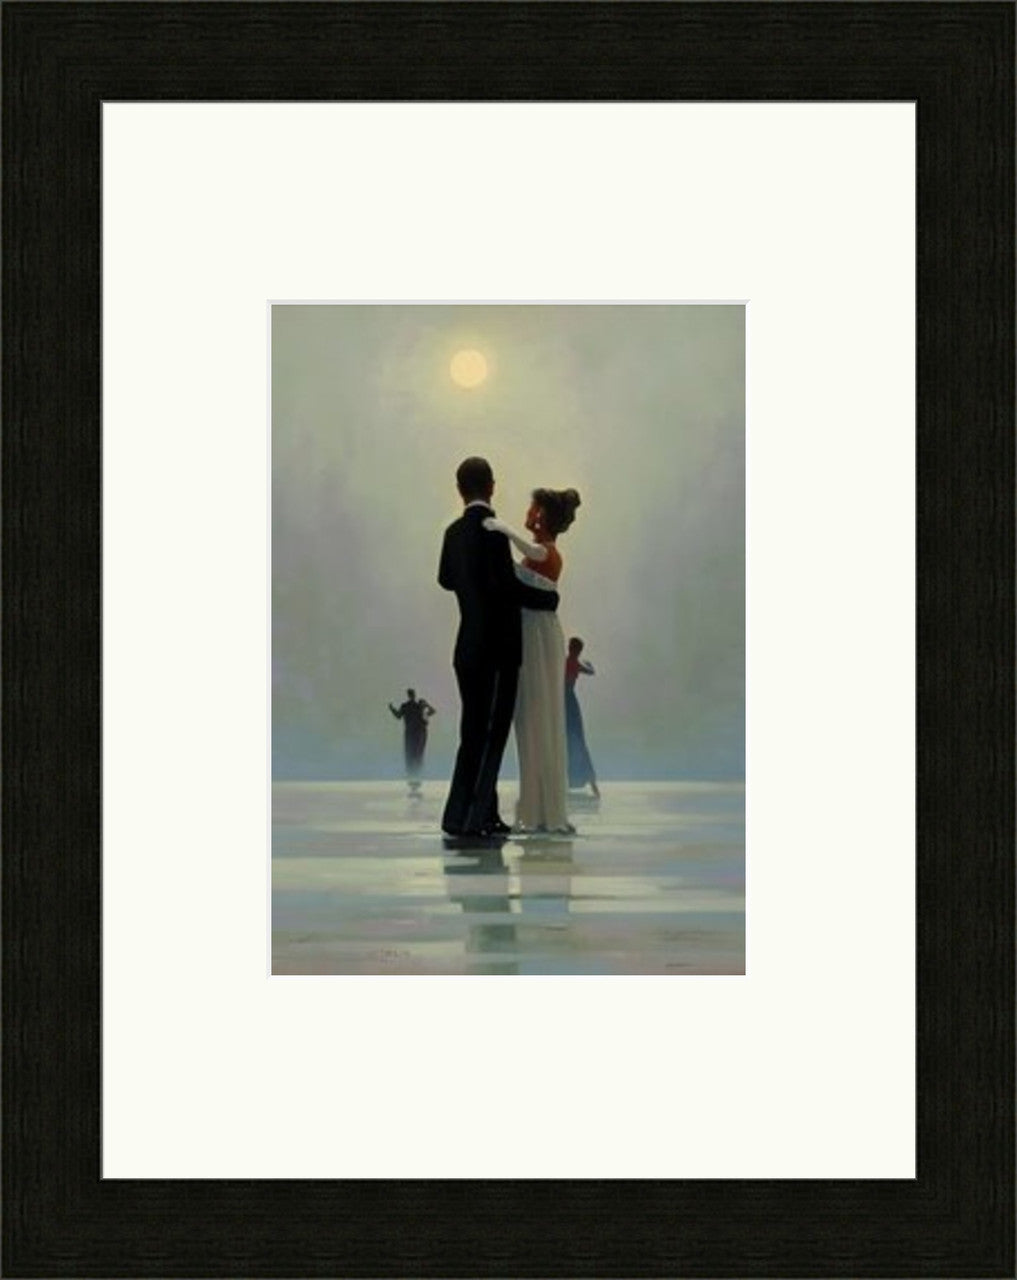 Dance Me to the End of Love by Jack Vettriano - Petite